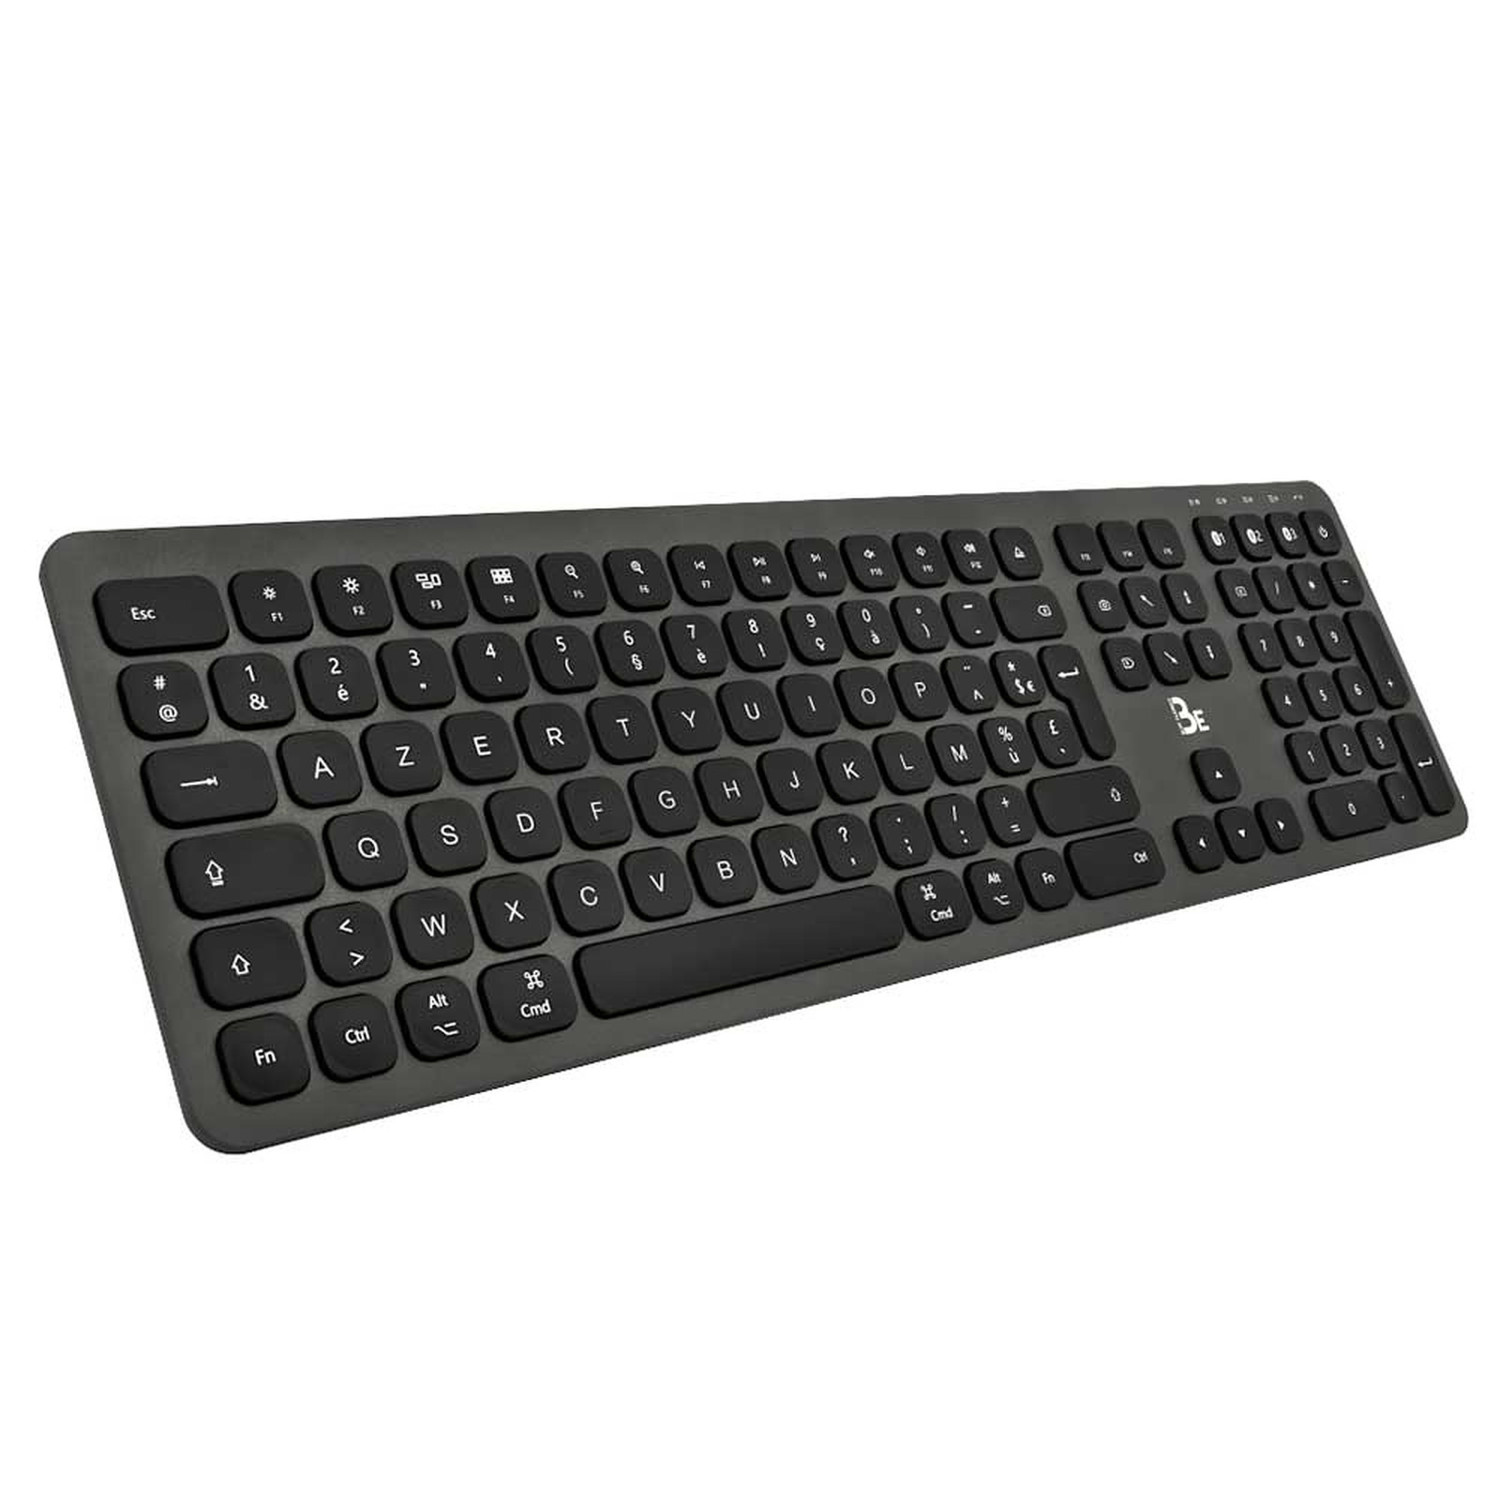 https://content.pearl.be/media/cache/default/article_ultralarge_high_nocrop/shared/images/articles/K/KT9/clavier-bluetooth-3-0-rechargeable-noir-ref_KT9977_1.jpg